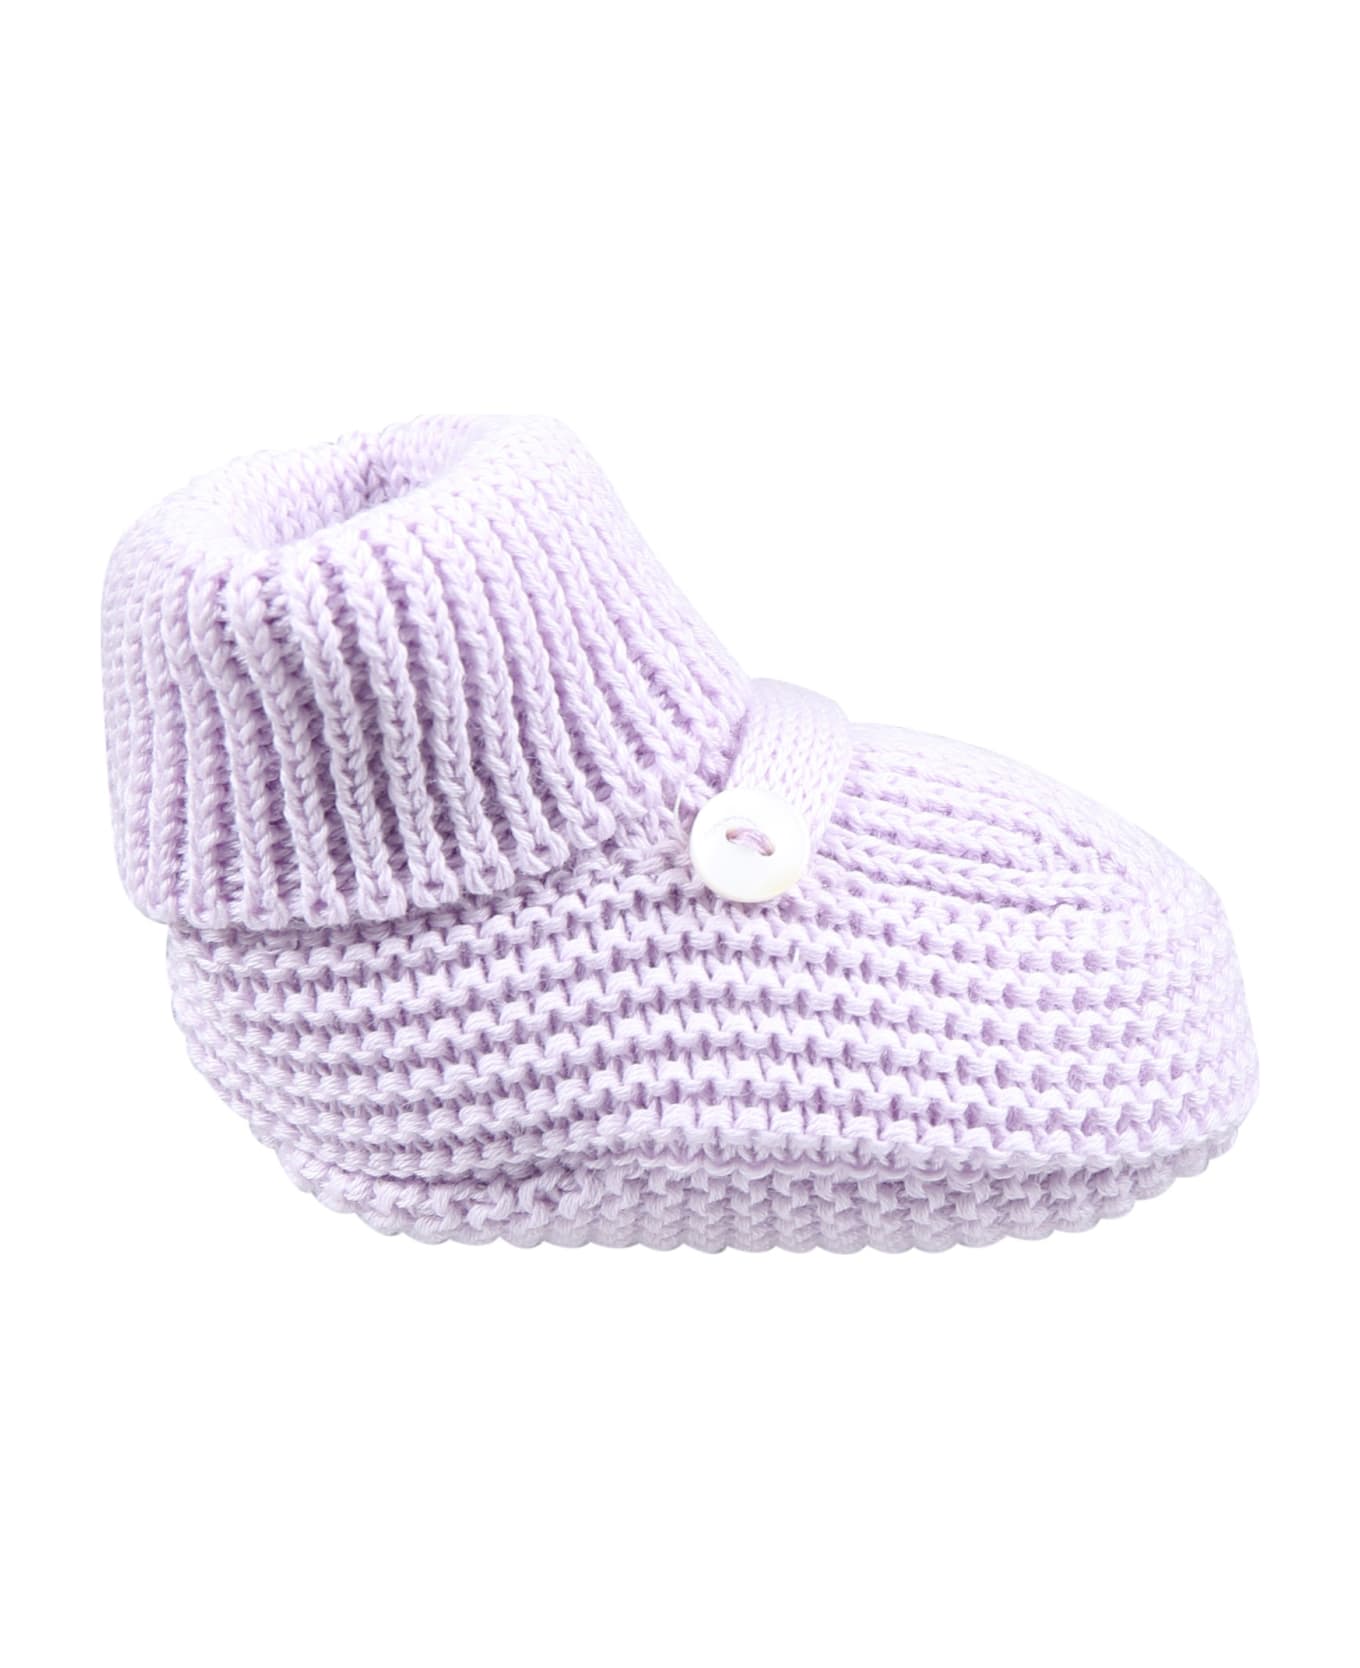 Little Bear Wisteria Bootees For Baby Girl - Violet アクセサリー＆ギフト